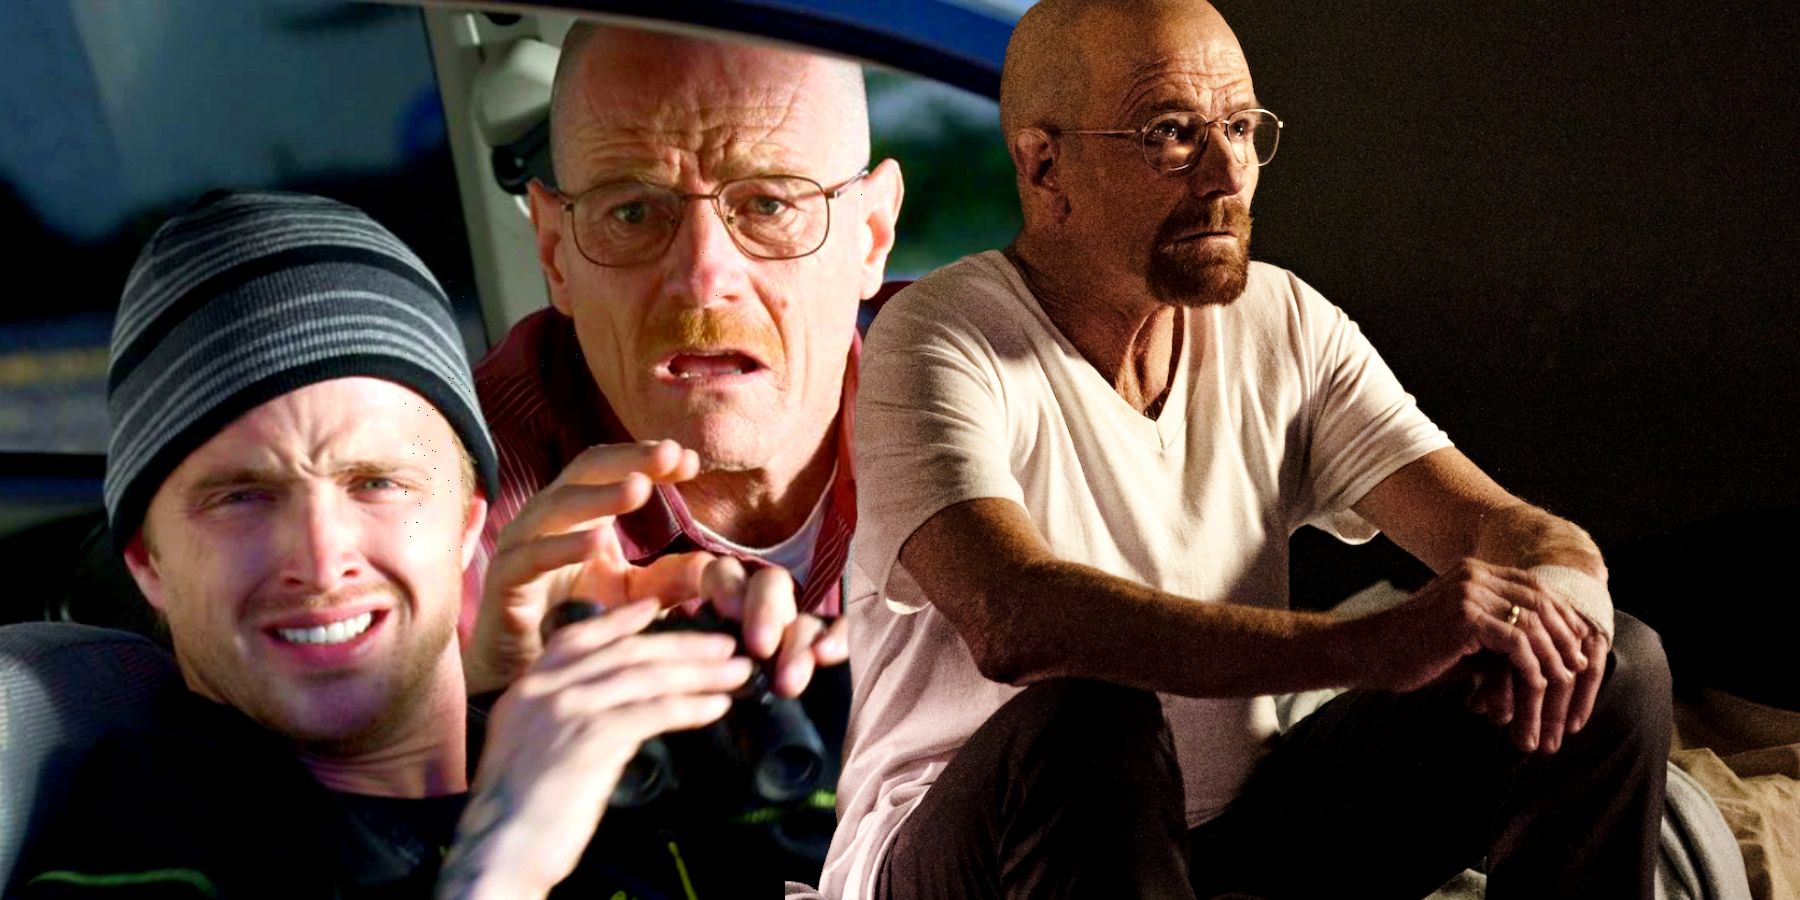 Aaron Paul as Jesse Pinkman and Bryan Cranston as Walter White in Breaking Bad with Cranston as Walt in Better Call Saul